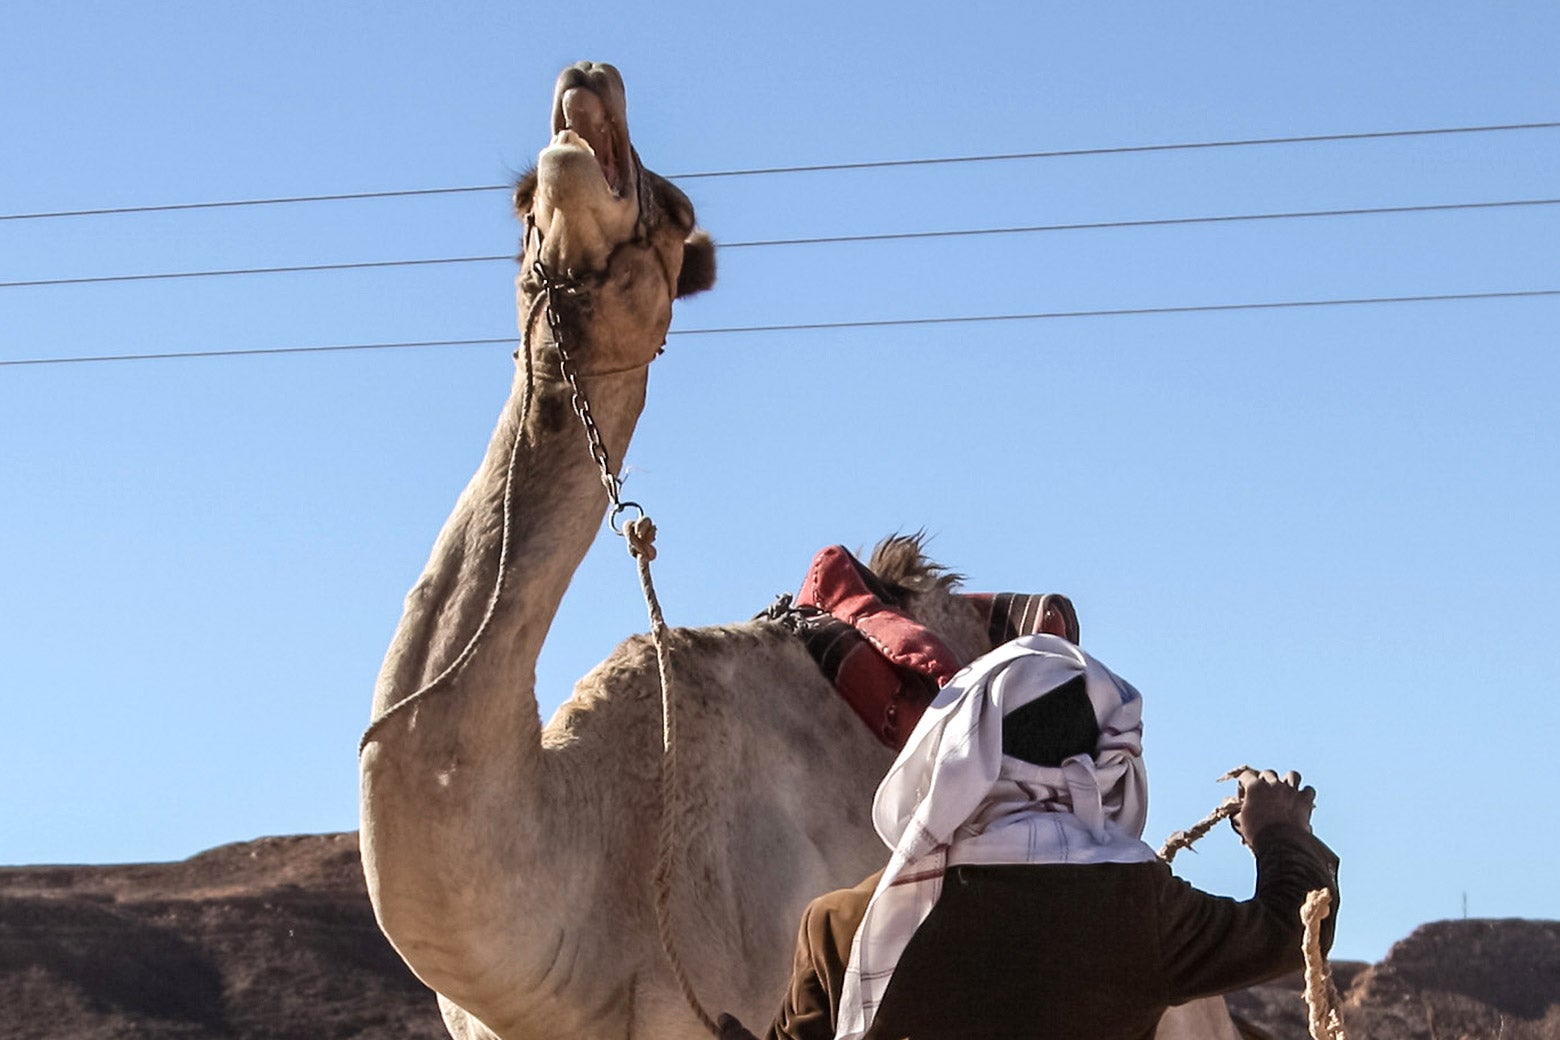 Camels, inherently very strong, can only be disciplined by years of careful training, most critically during their first four years, paralleled with a genuine bond of mutual affection with their owners.